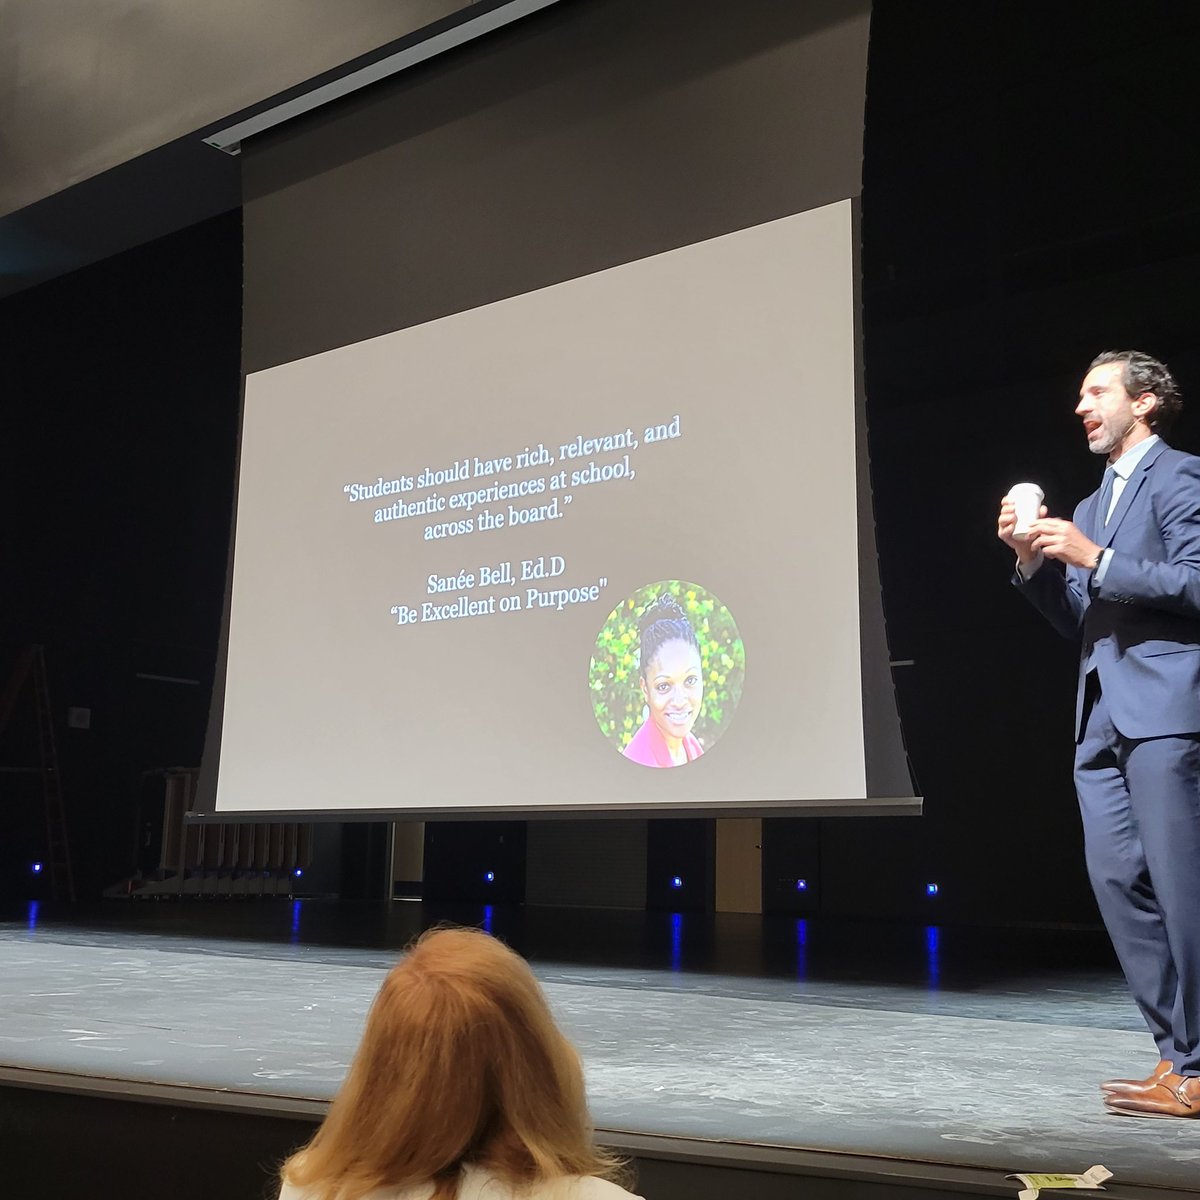 Shout out to @SaneeBell in the @gcouros presentation today. One of my best masters professors and still inspiring educators whether in person or in reference! #FBISD @FortBendISD